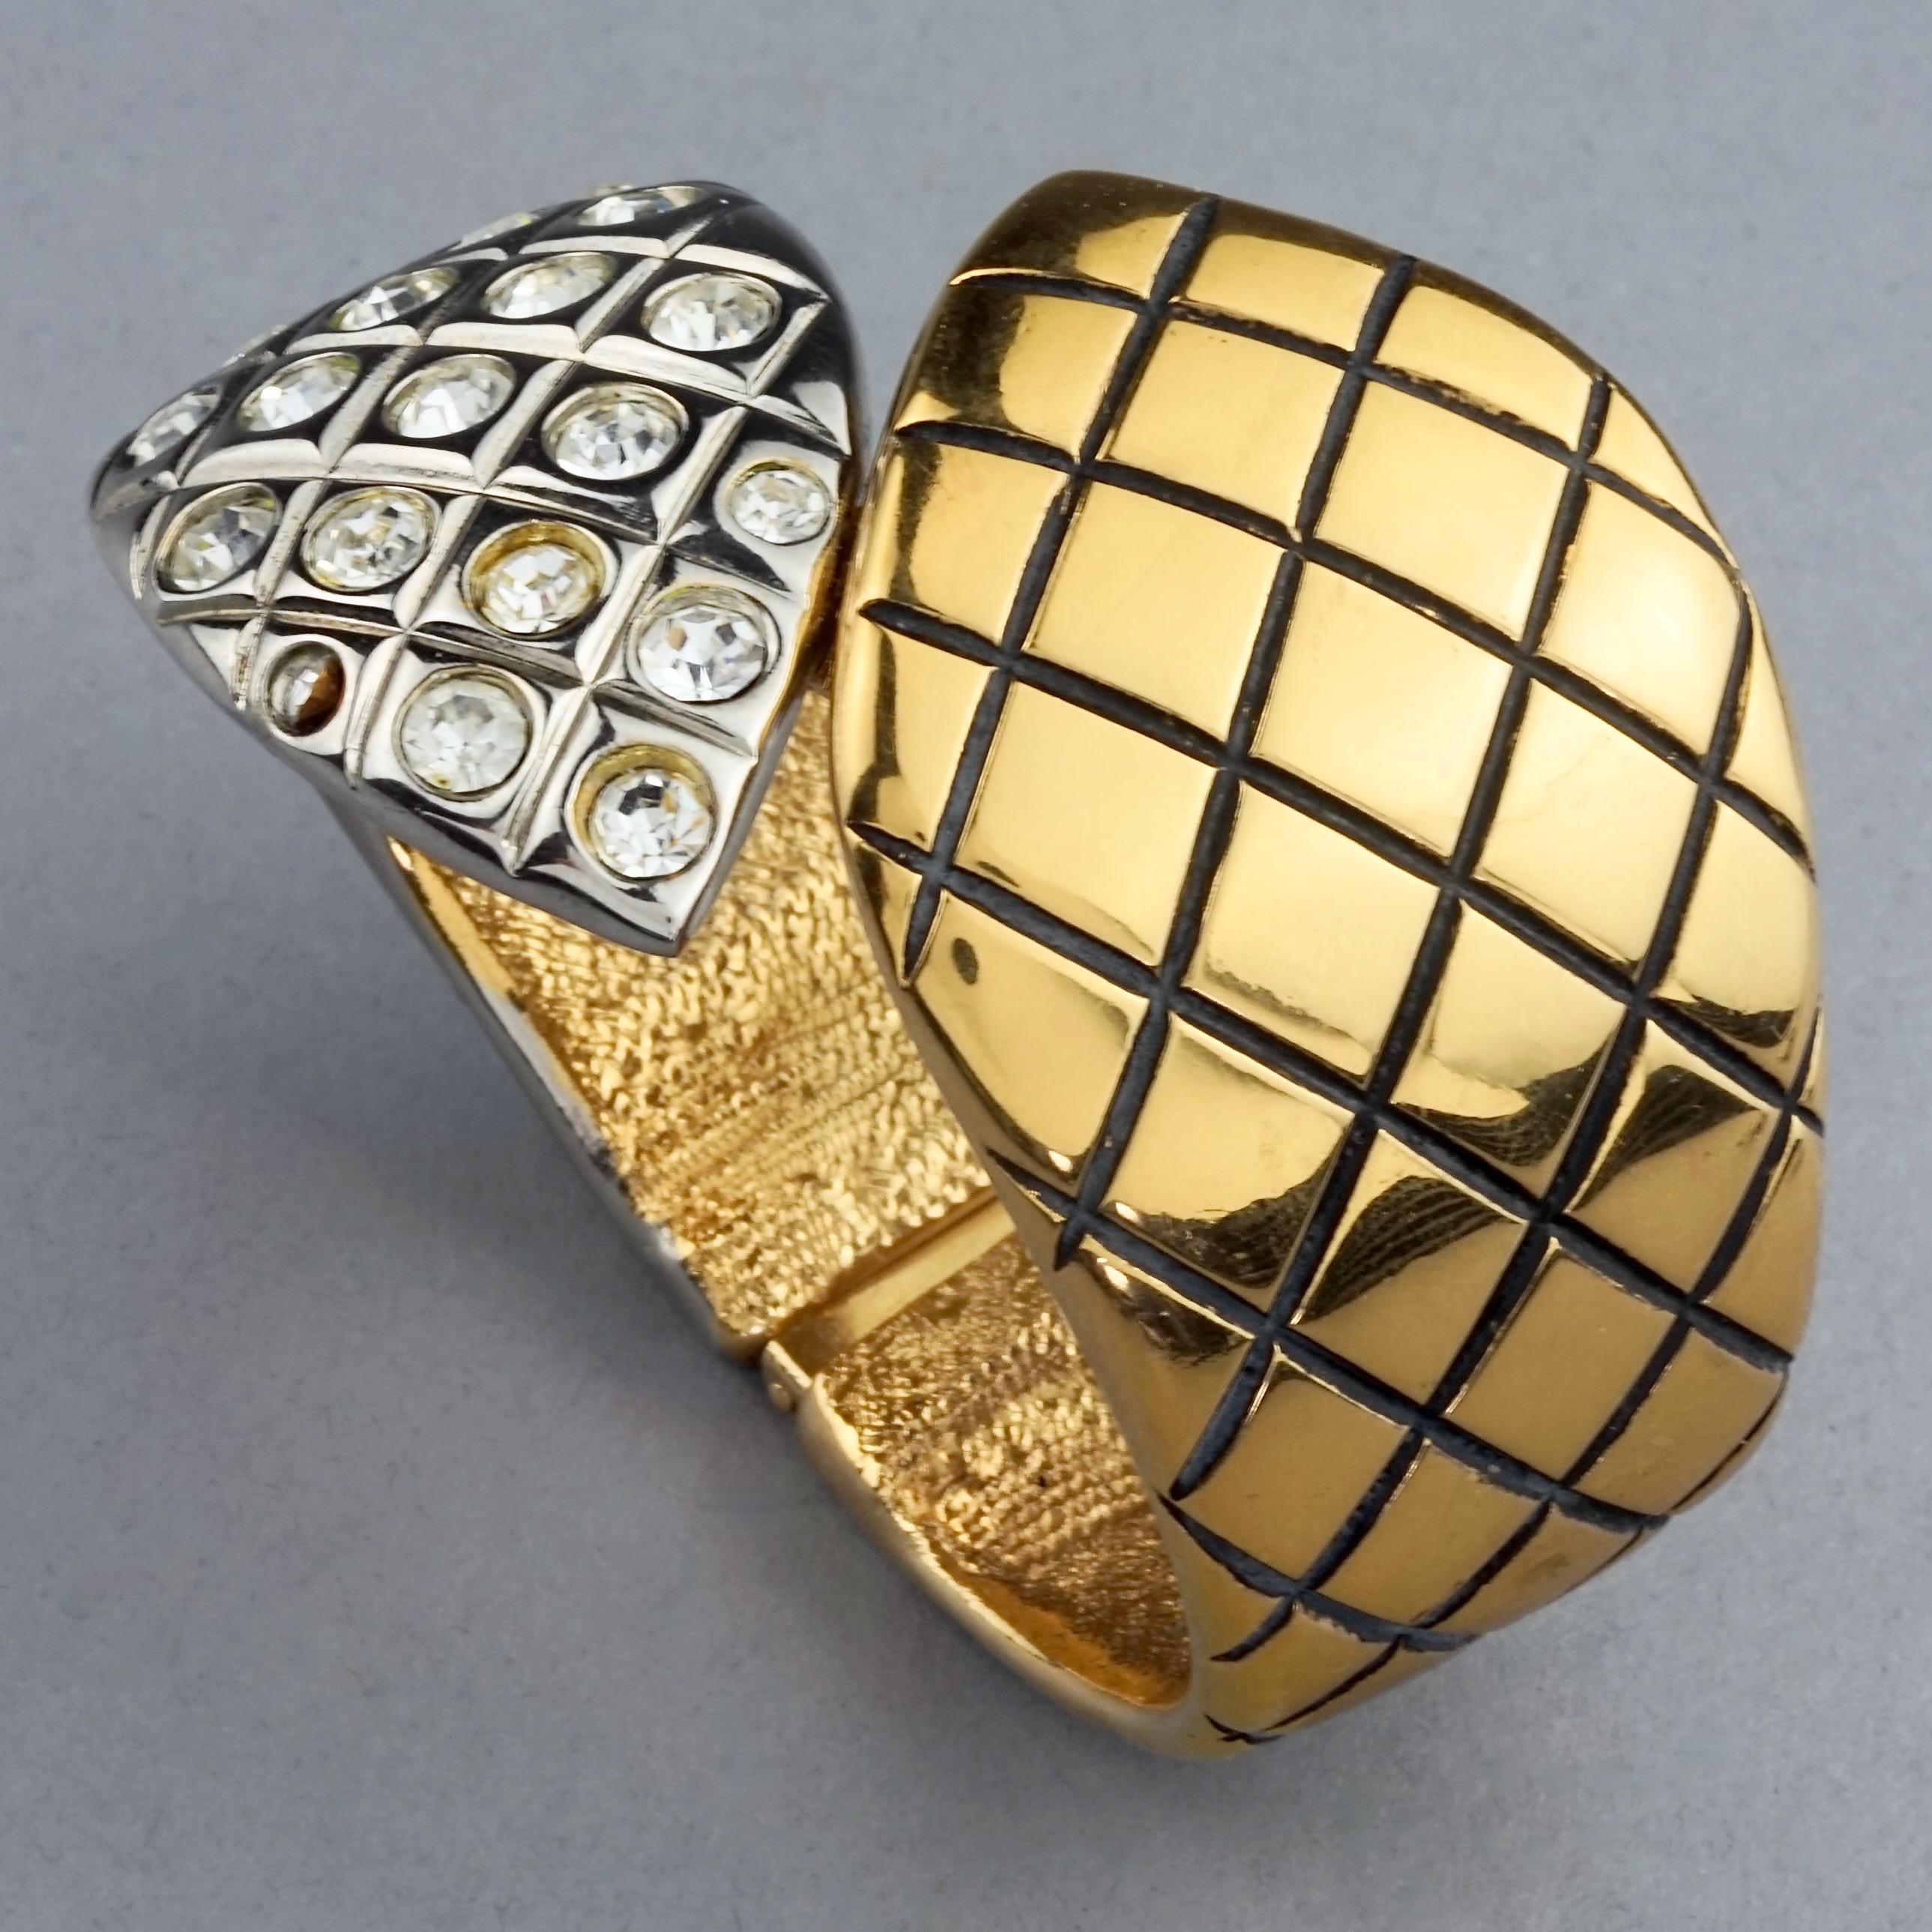 Vintage YVES SAINT LAURENT Ysl Quilted Rhinestone 2 Tone Rigid Cuff Bracelet In Excellent Condition For Sale In Kingersheim, Alsace